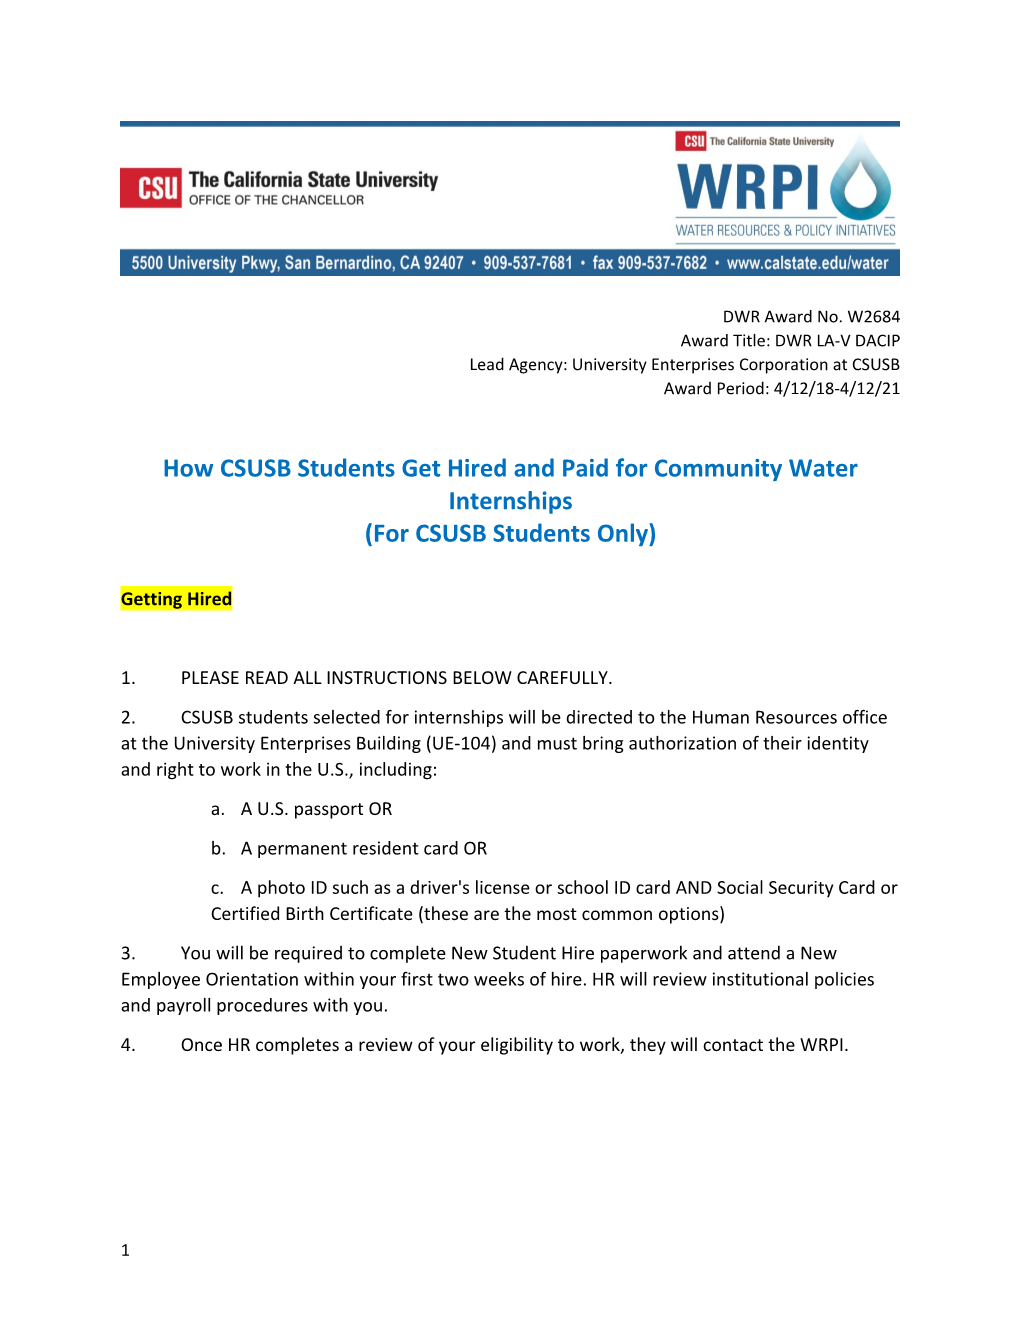 How CSUSB Students Get Hired and Paid for Community Water Internships